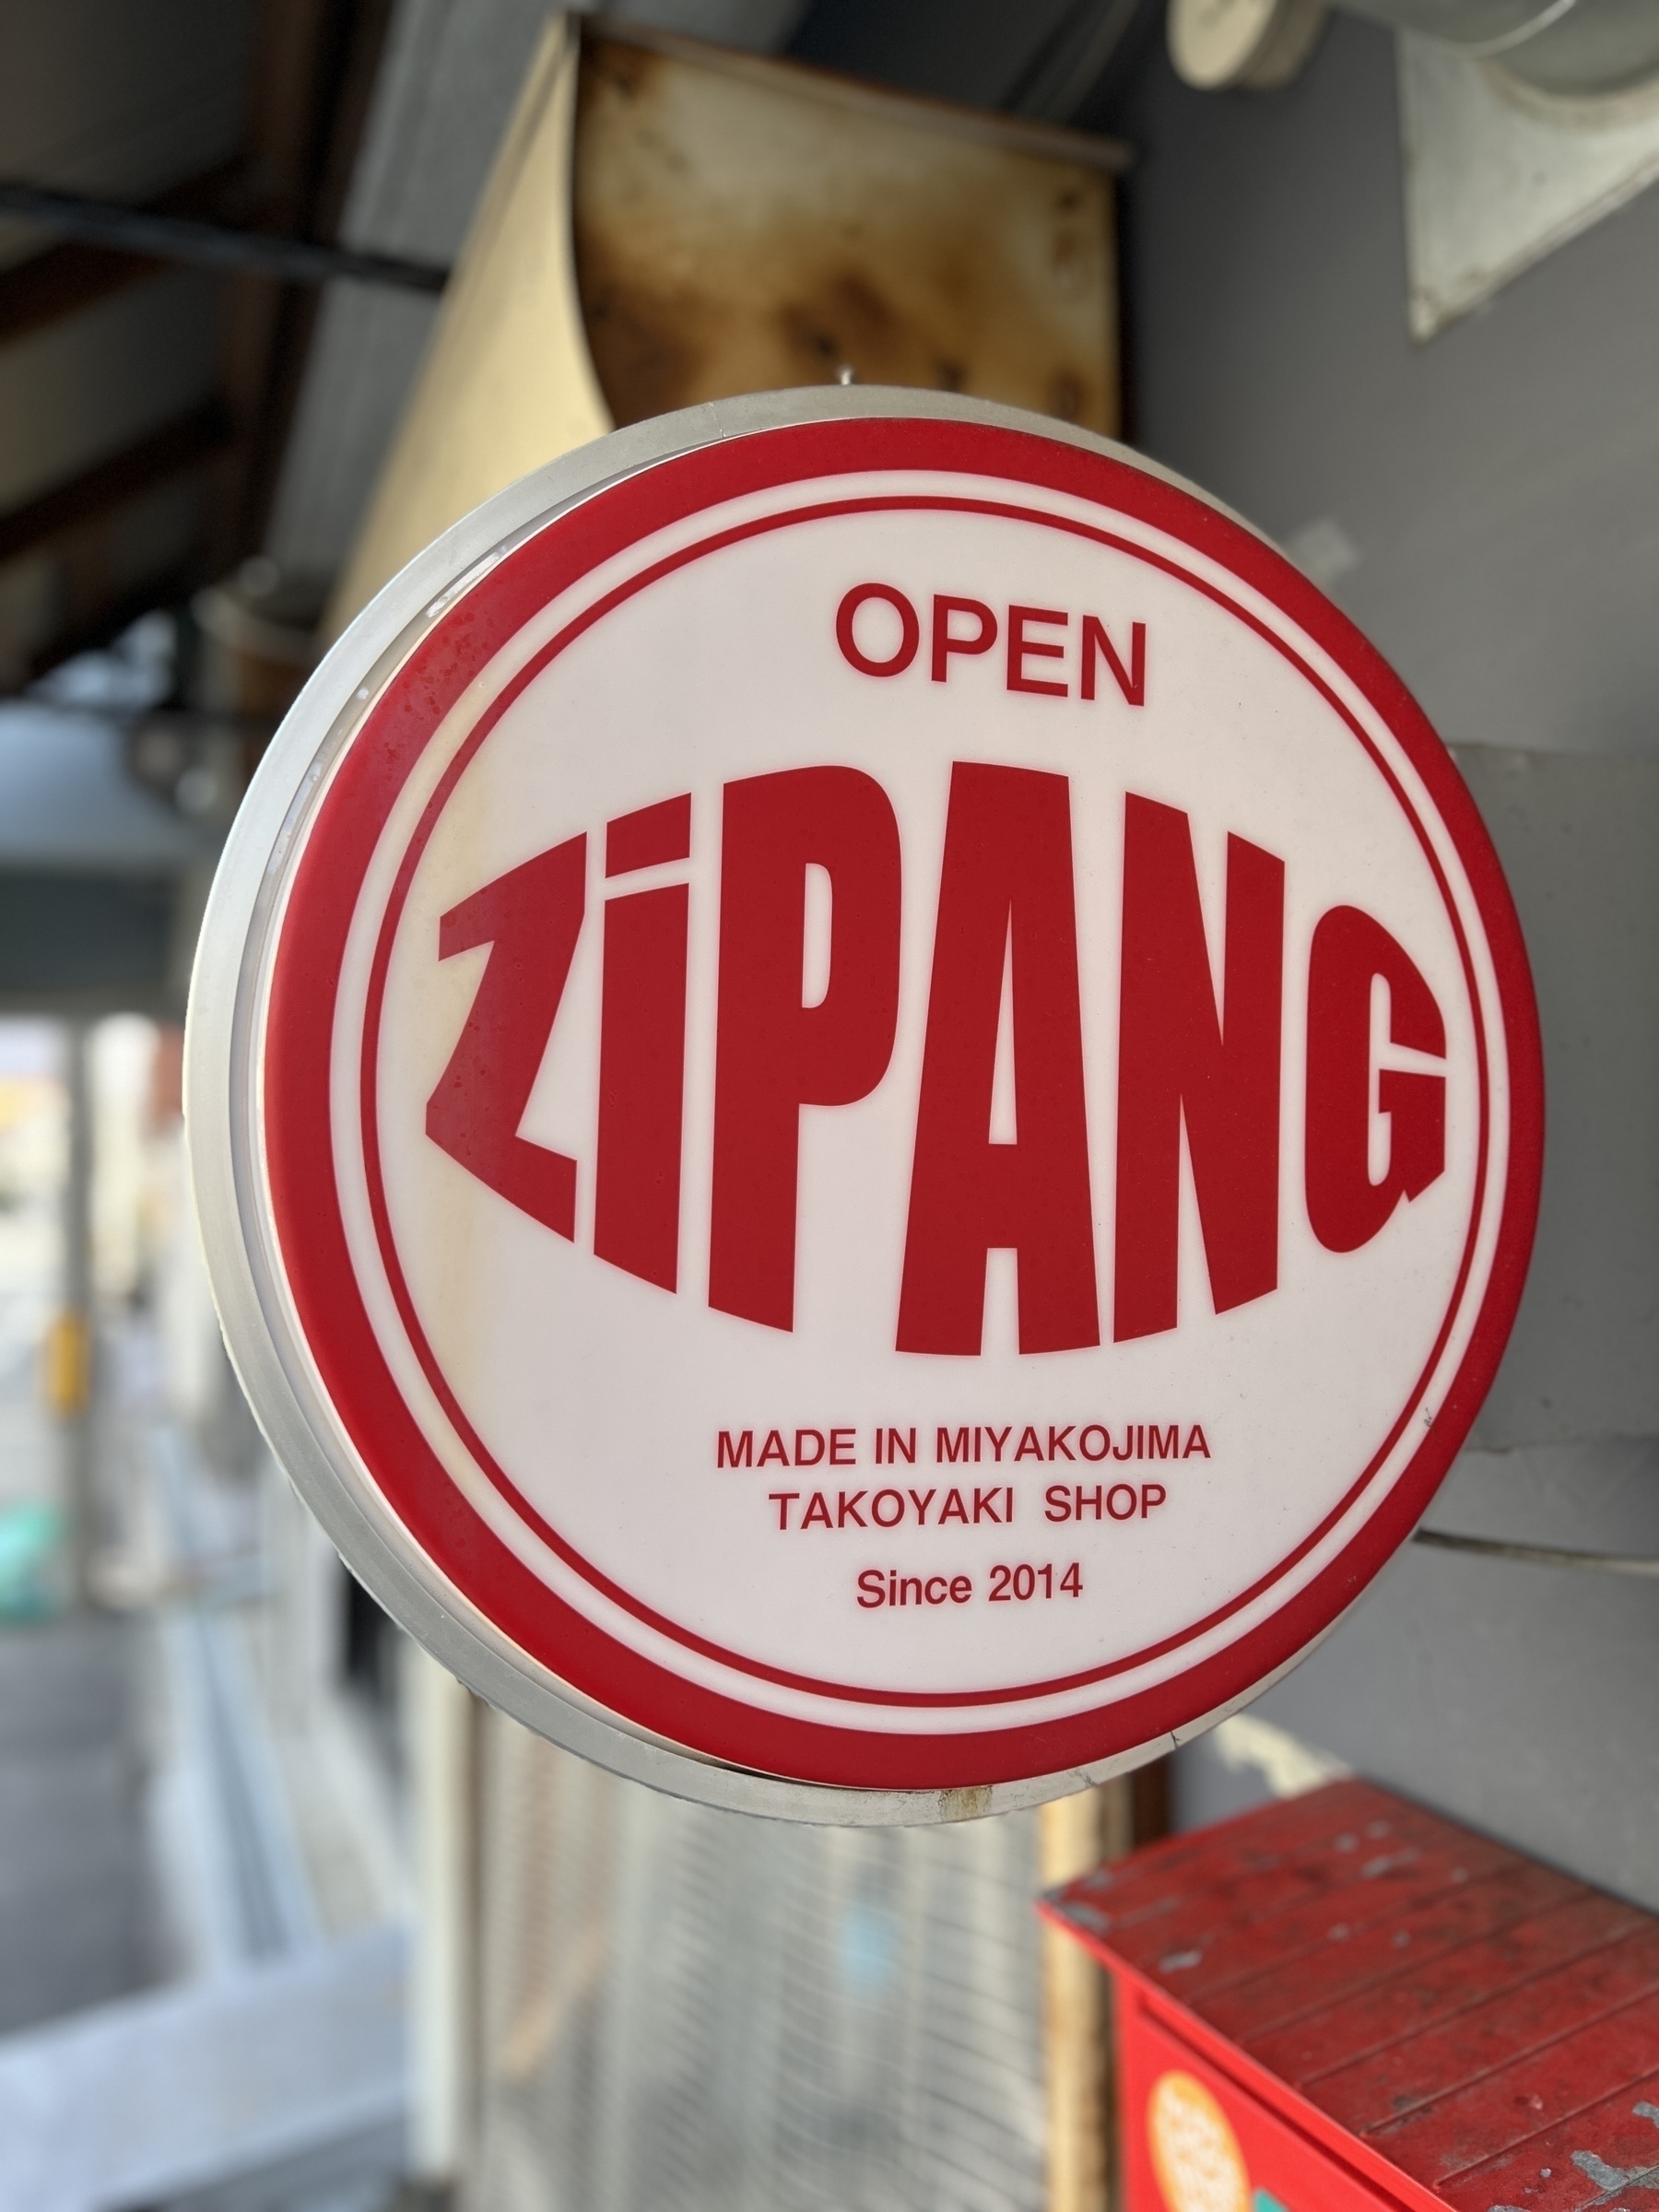 Sign for a takoyaki restaurant called ZIPANG, an old name for Japan used by Marco Polo. Tho this could be a reference to a beloved Manga series